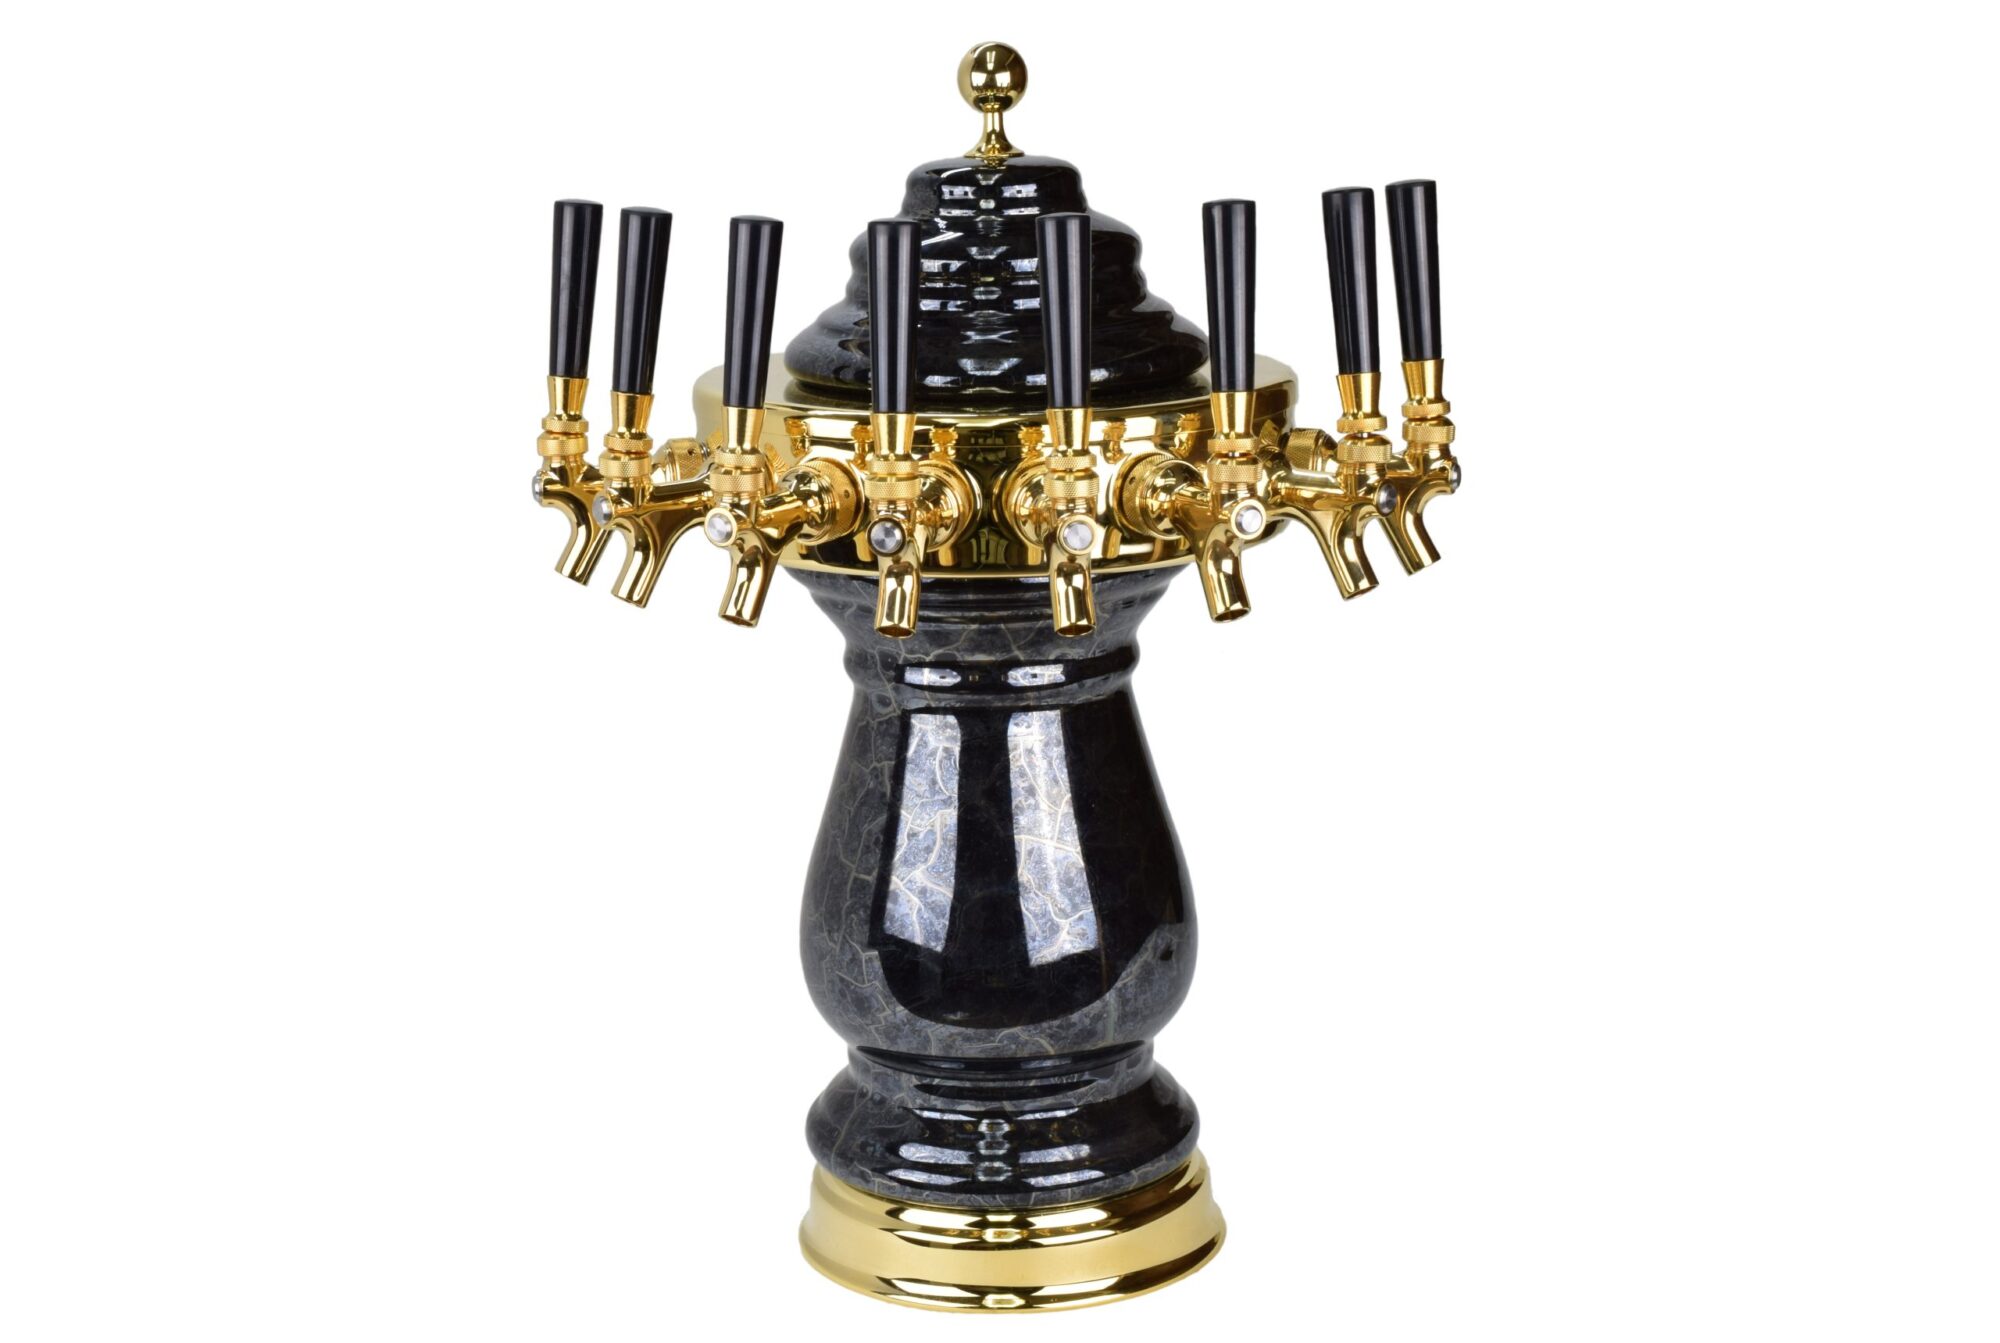 884B-8BM -- Eight Faucet Ceramic Tower with PVD Gold Hardware and Faucets - Shown in Black Marble